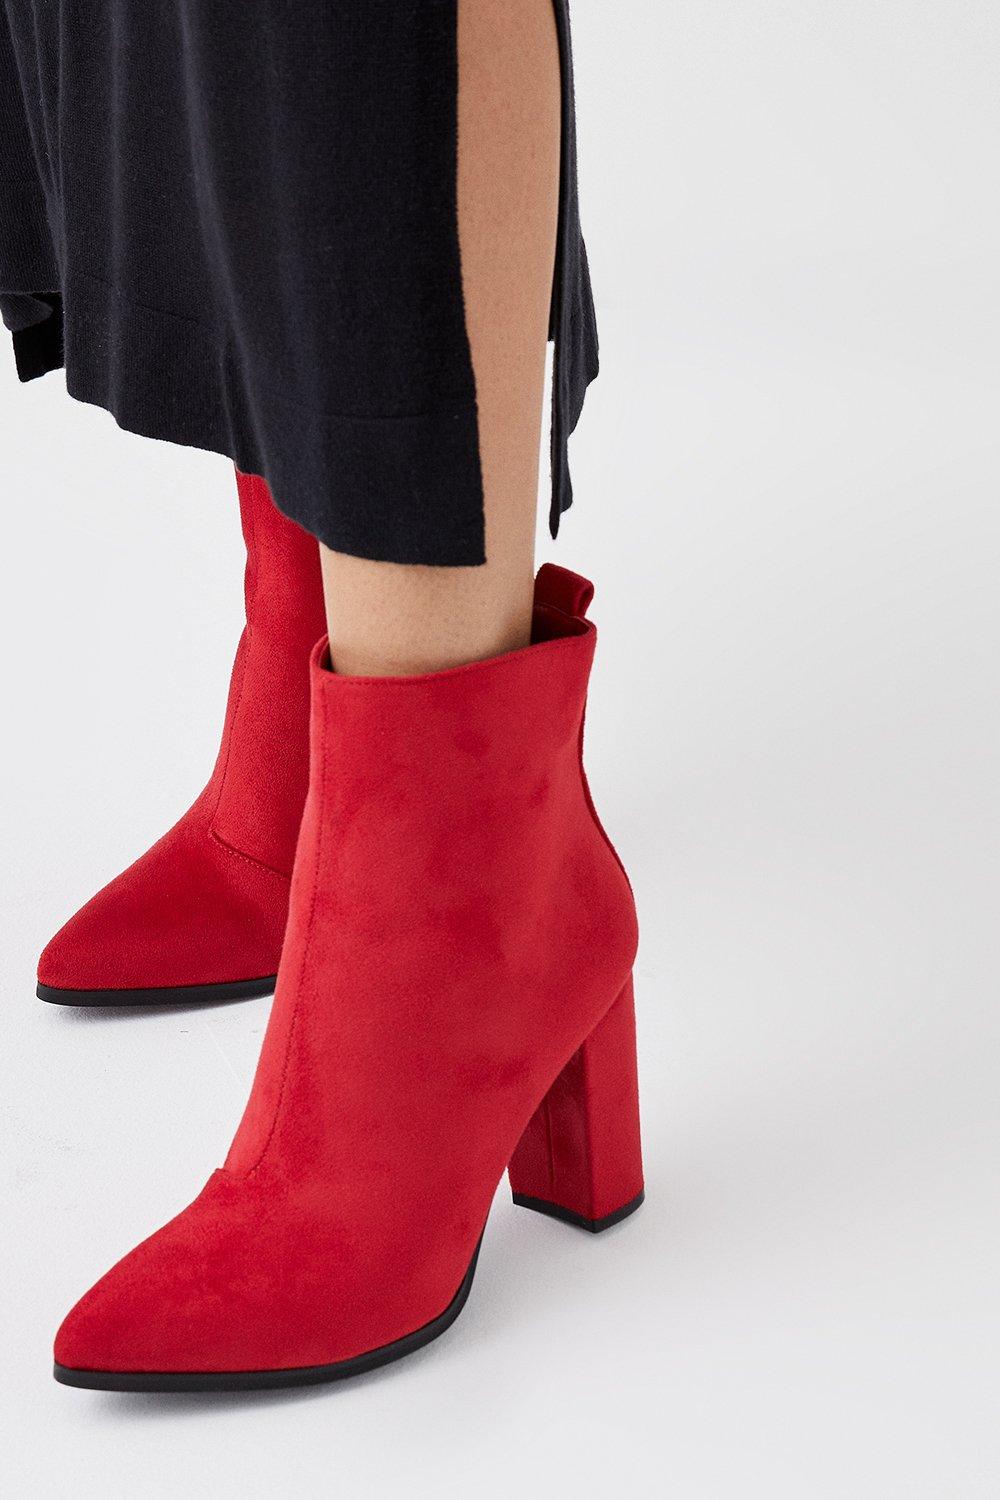 Women’s Astro Heeled Ankle Boots - red - 6